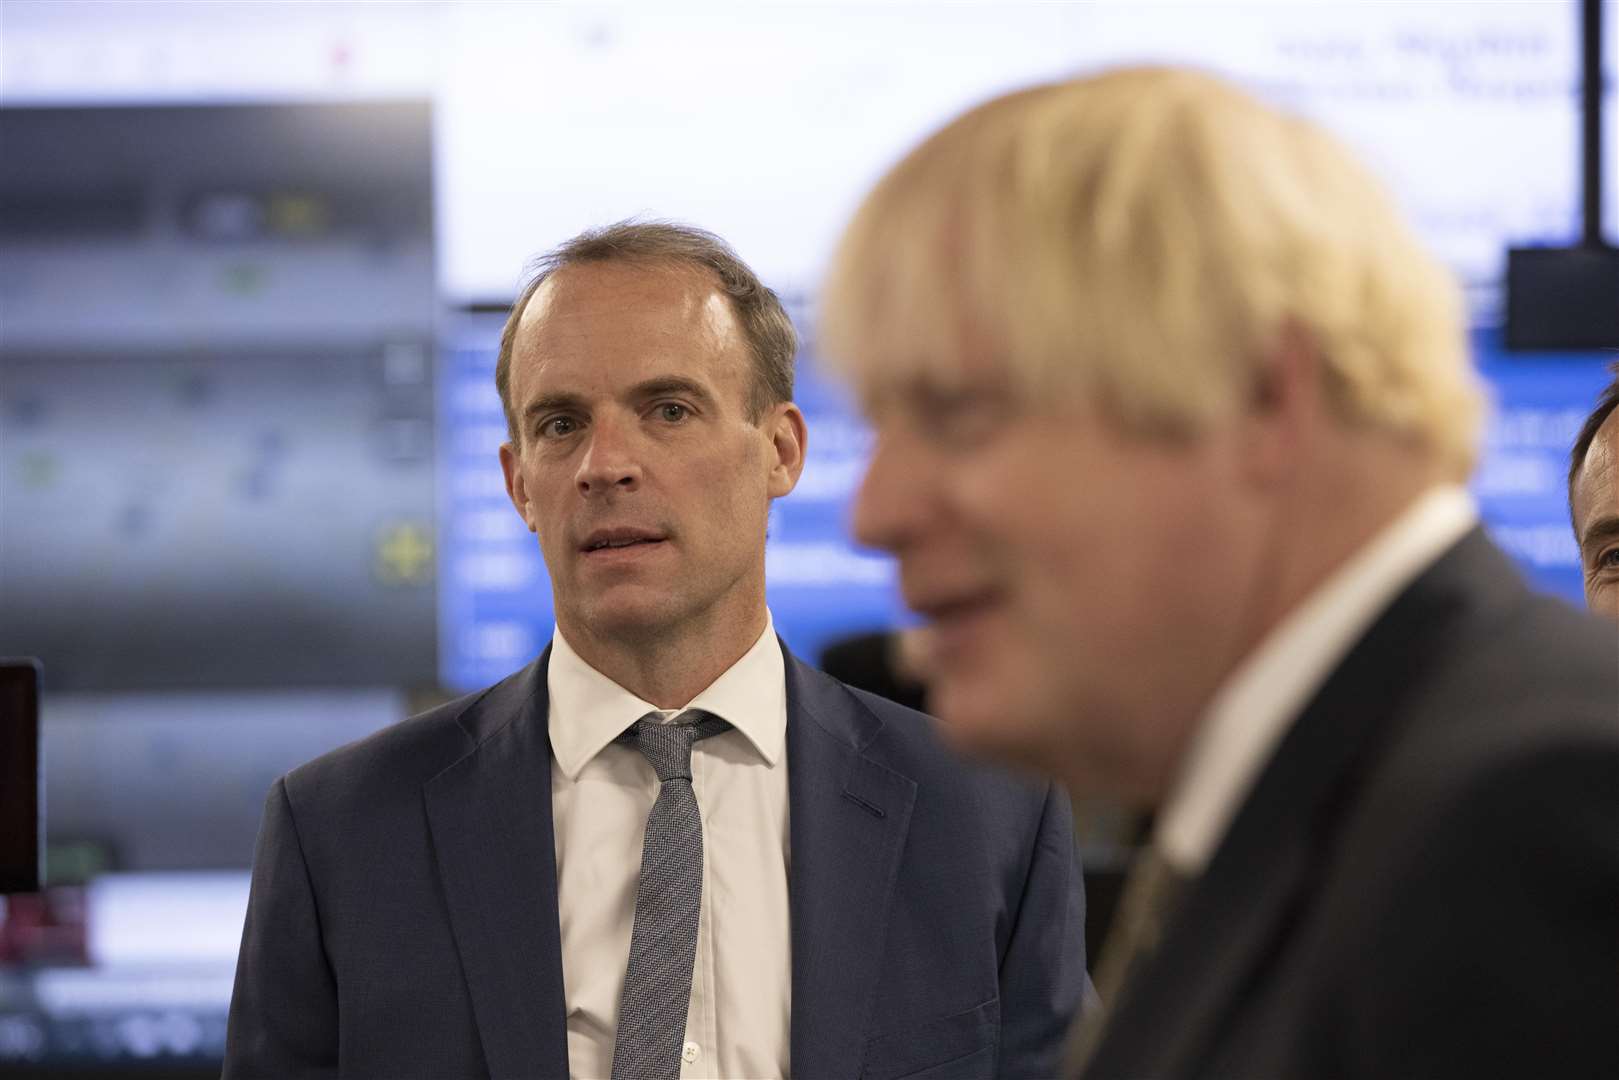 Dominic Raab remained publicly loyal to Boris Johnson as his premiership crumbled last year (Jeff Gilbert/Daily Telegraph/PA)